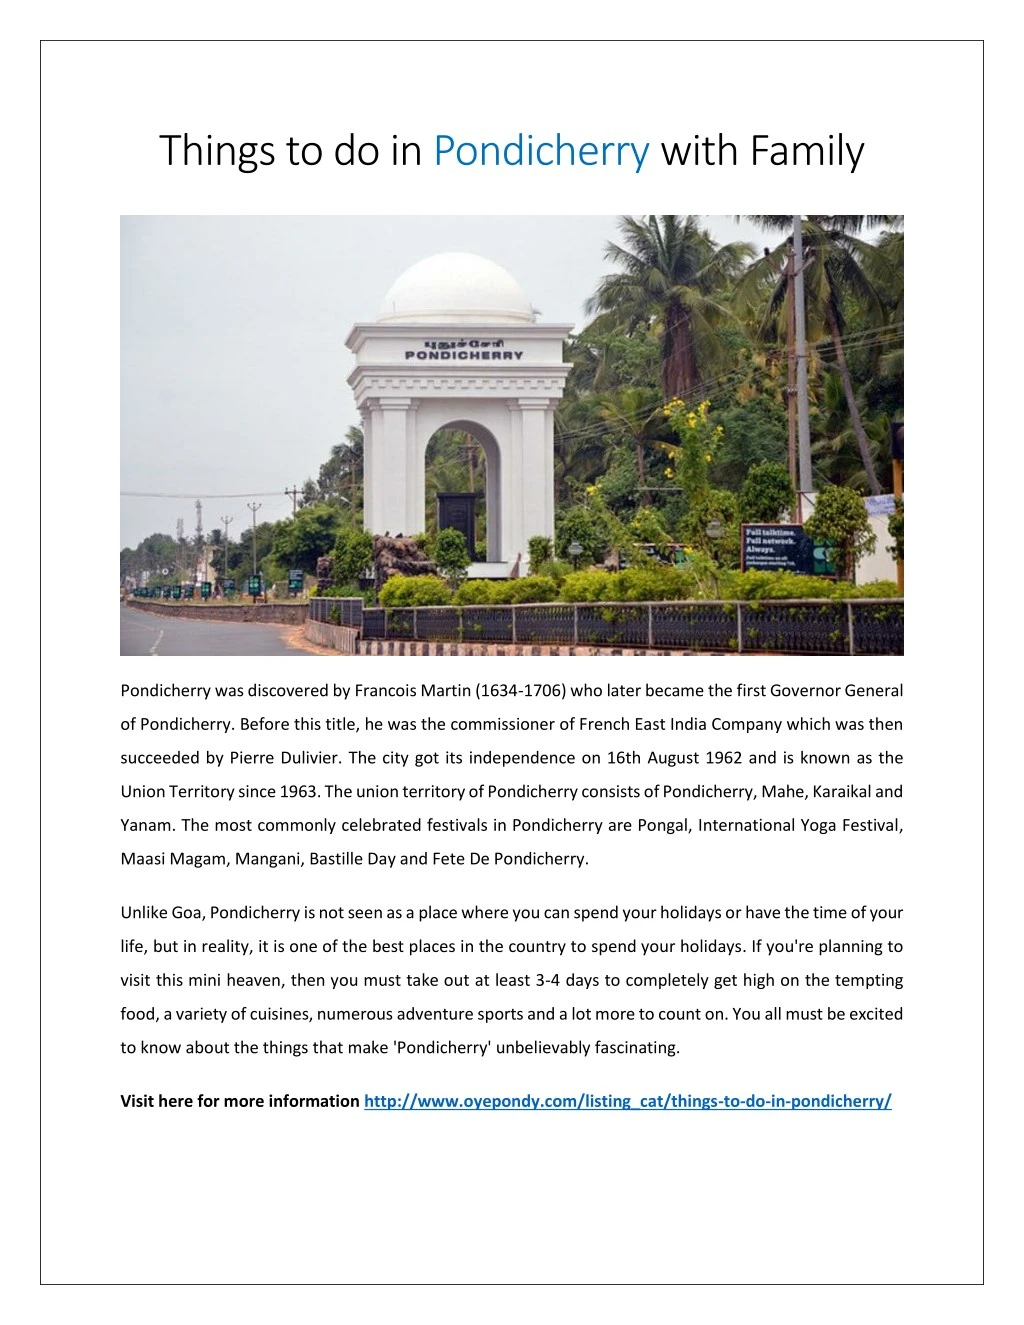 things to do in pondicherry with family